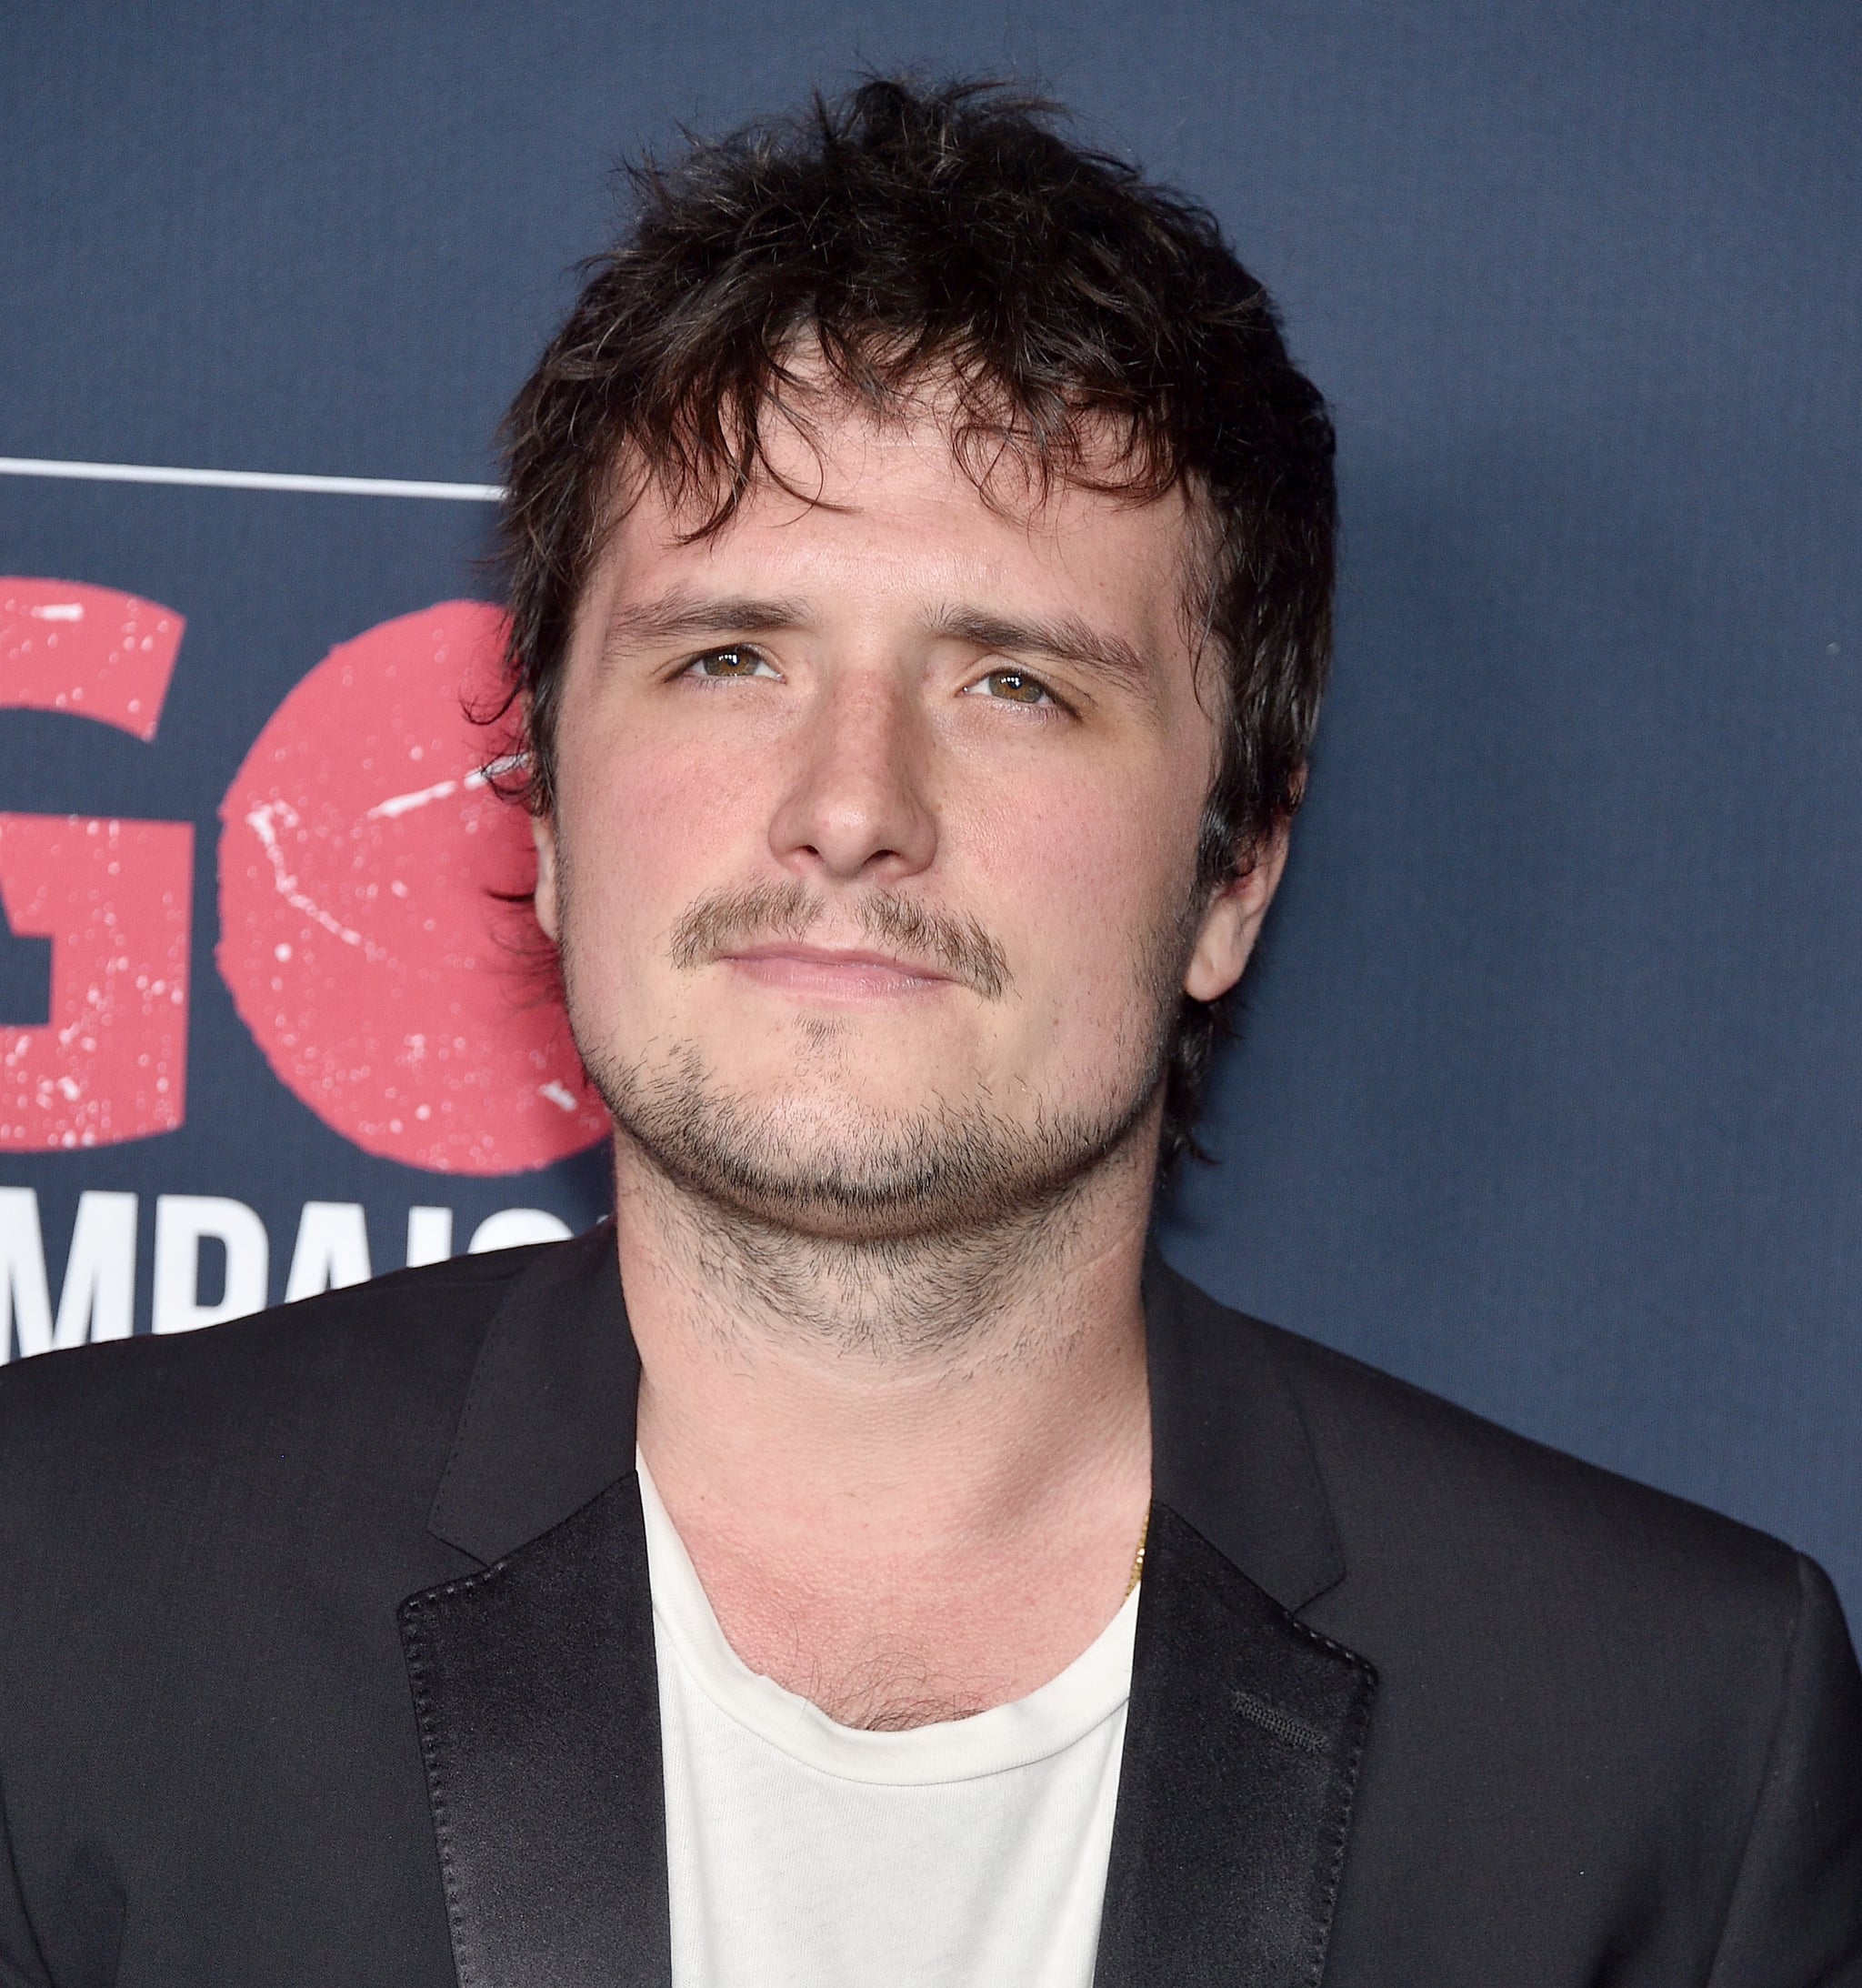   Josh Hutcherson arrives at the Go Campaign's 13th Annual Go Gala at NeueHouse Hollywood on November 16, 2019 in Los Angeles, California.  (Photo by Gregg DeGuire/FilmMagic)